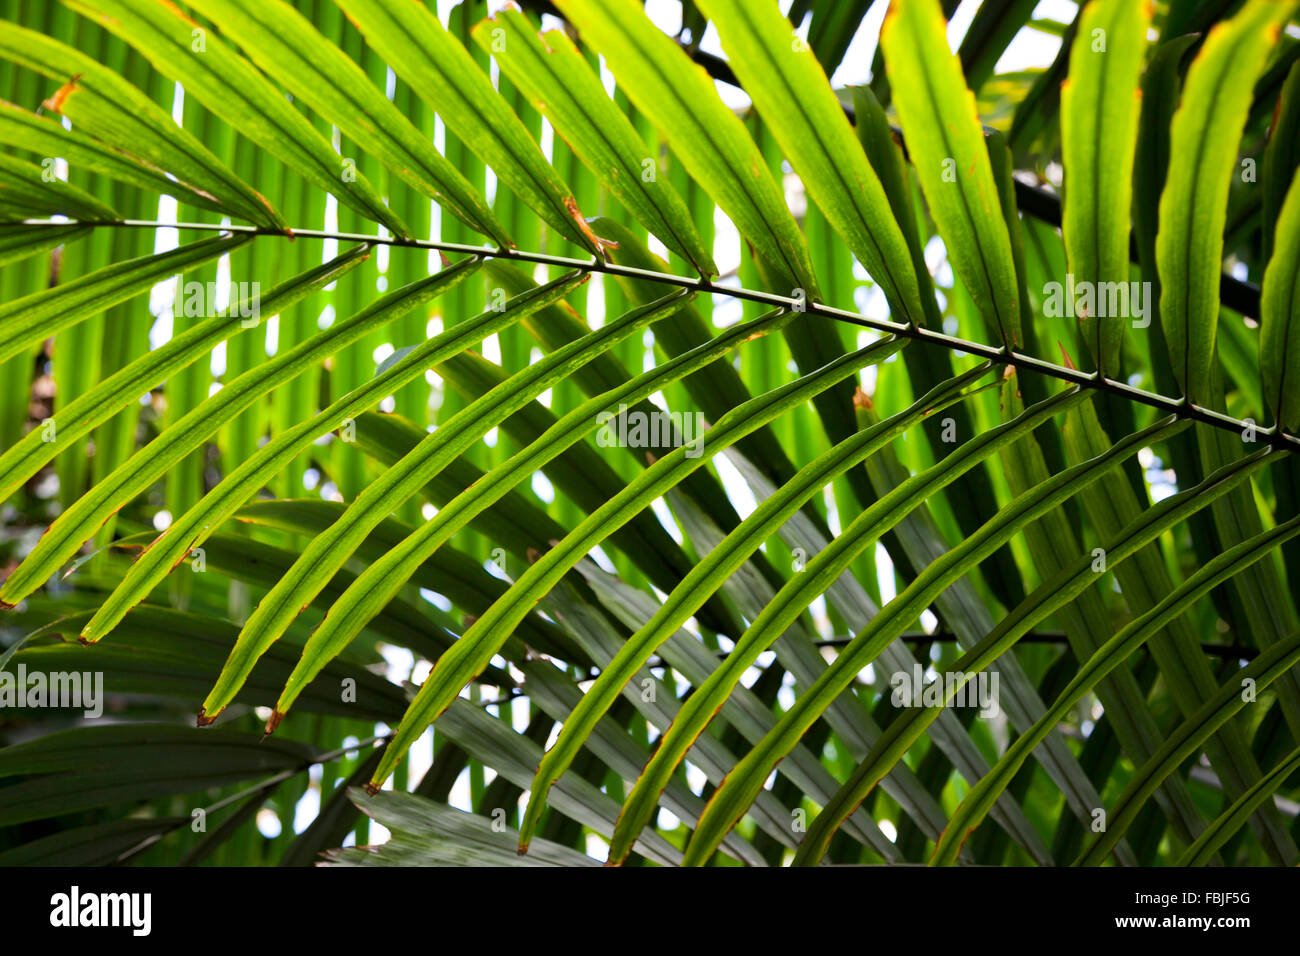 Layers of exotic palm leaves background Stock Photo